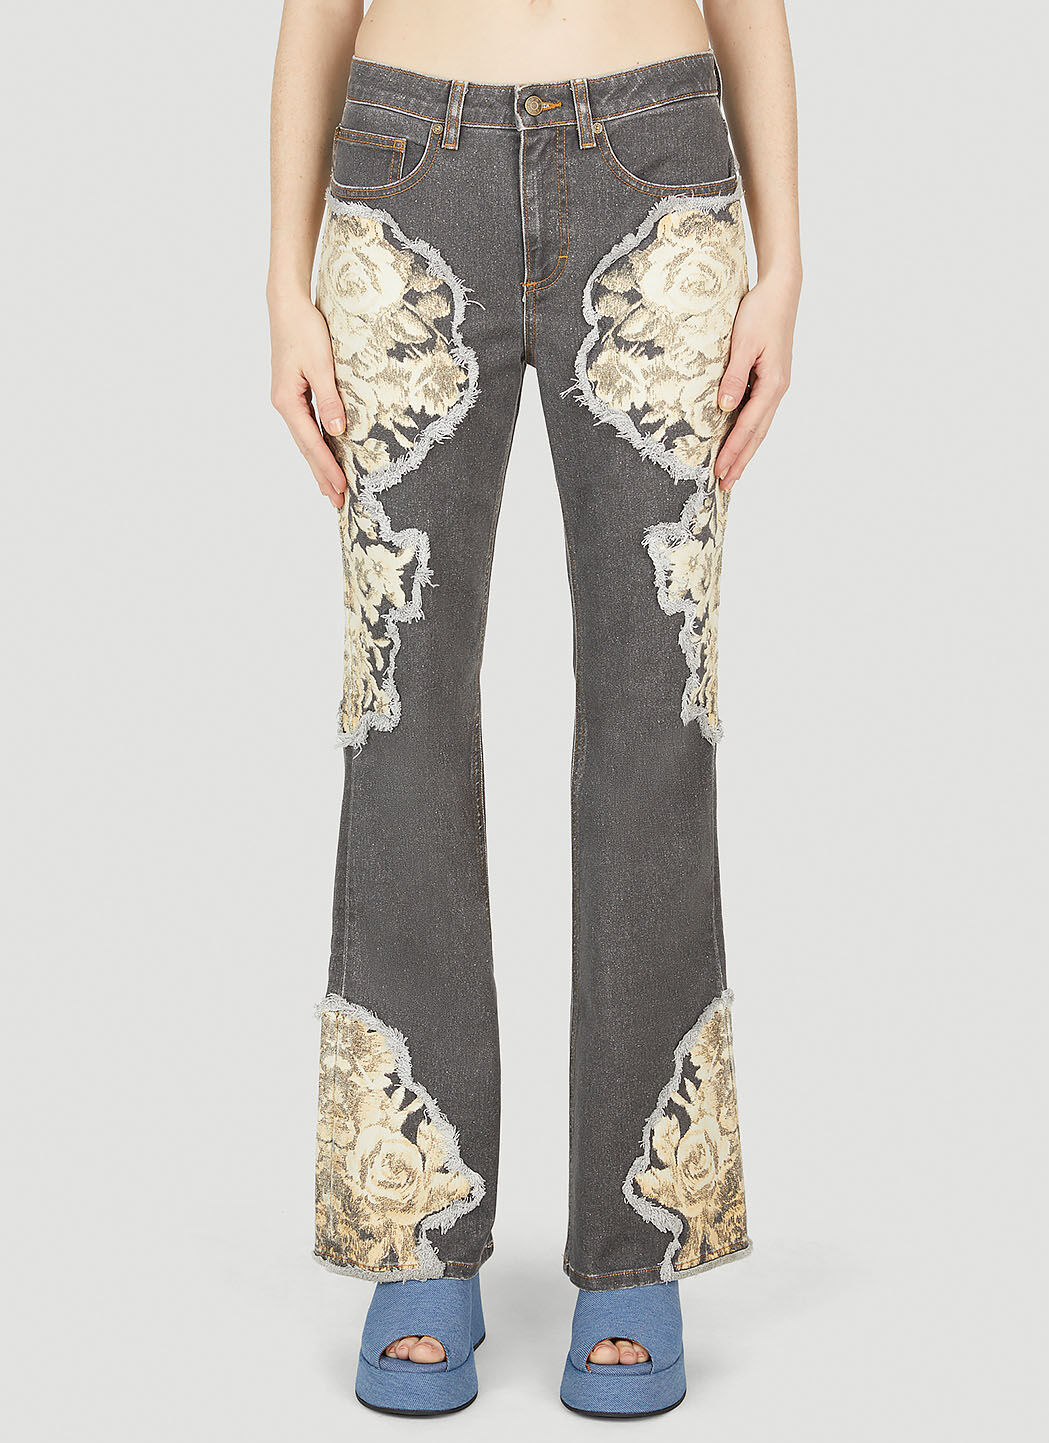 Guess USA Floral Printed Flared Jeans Black gue0354001